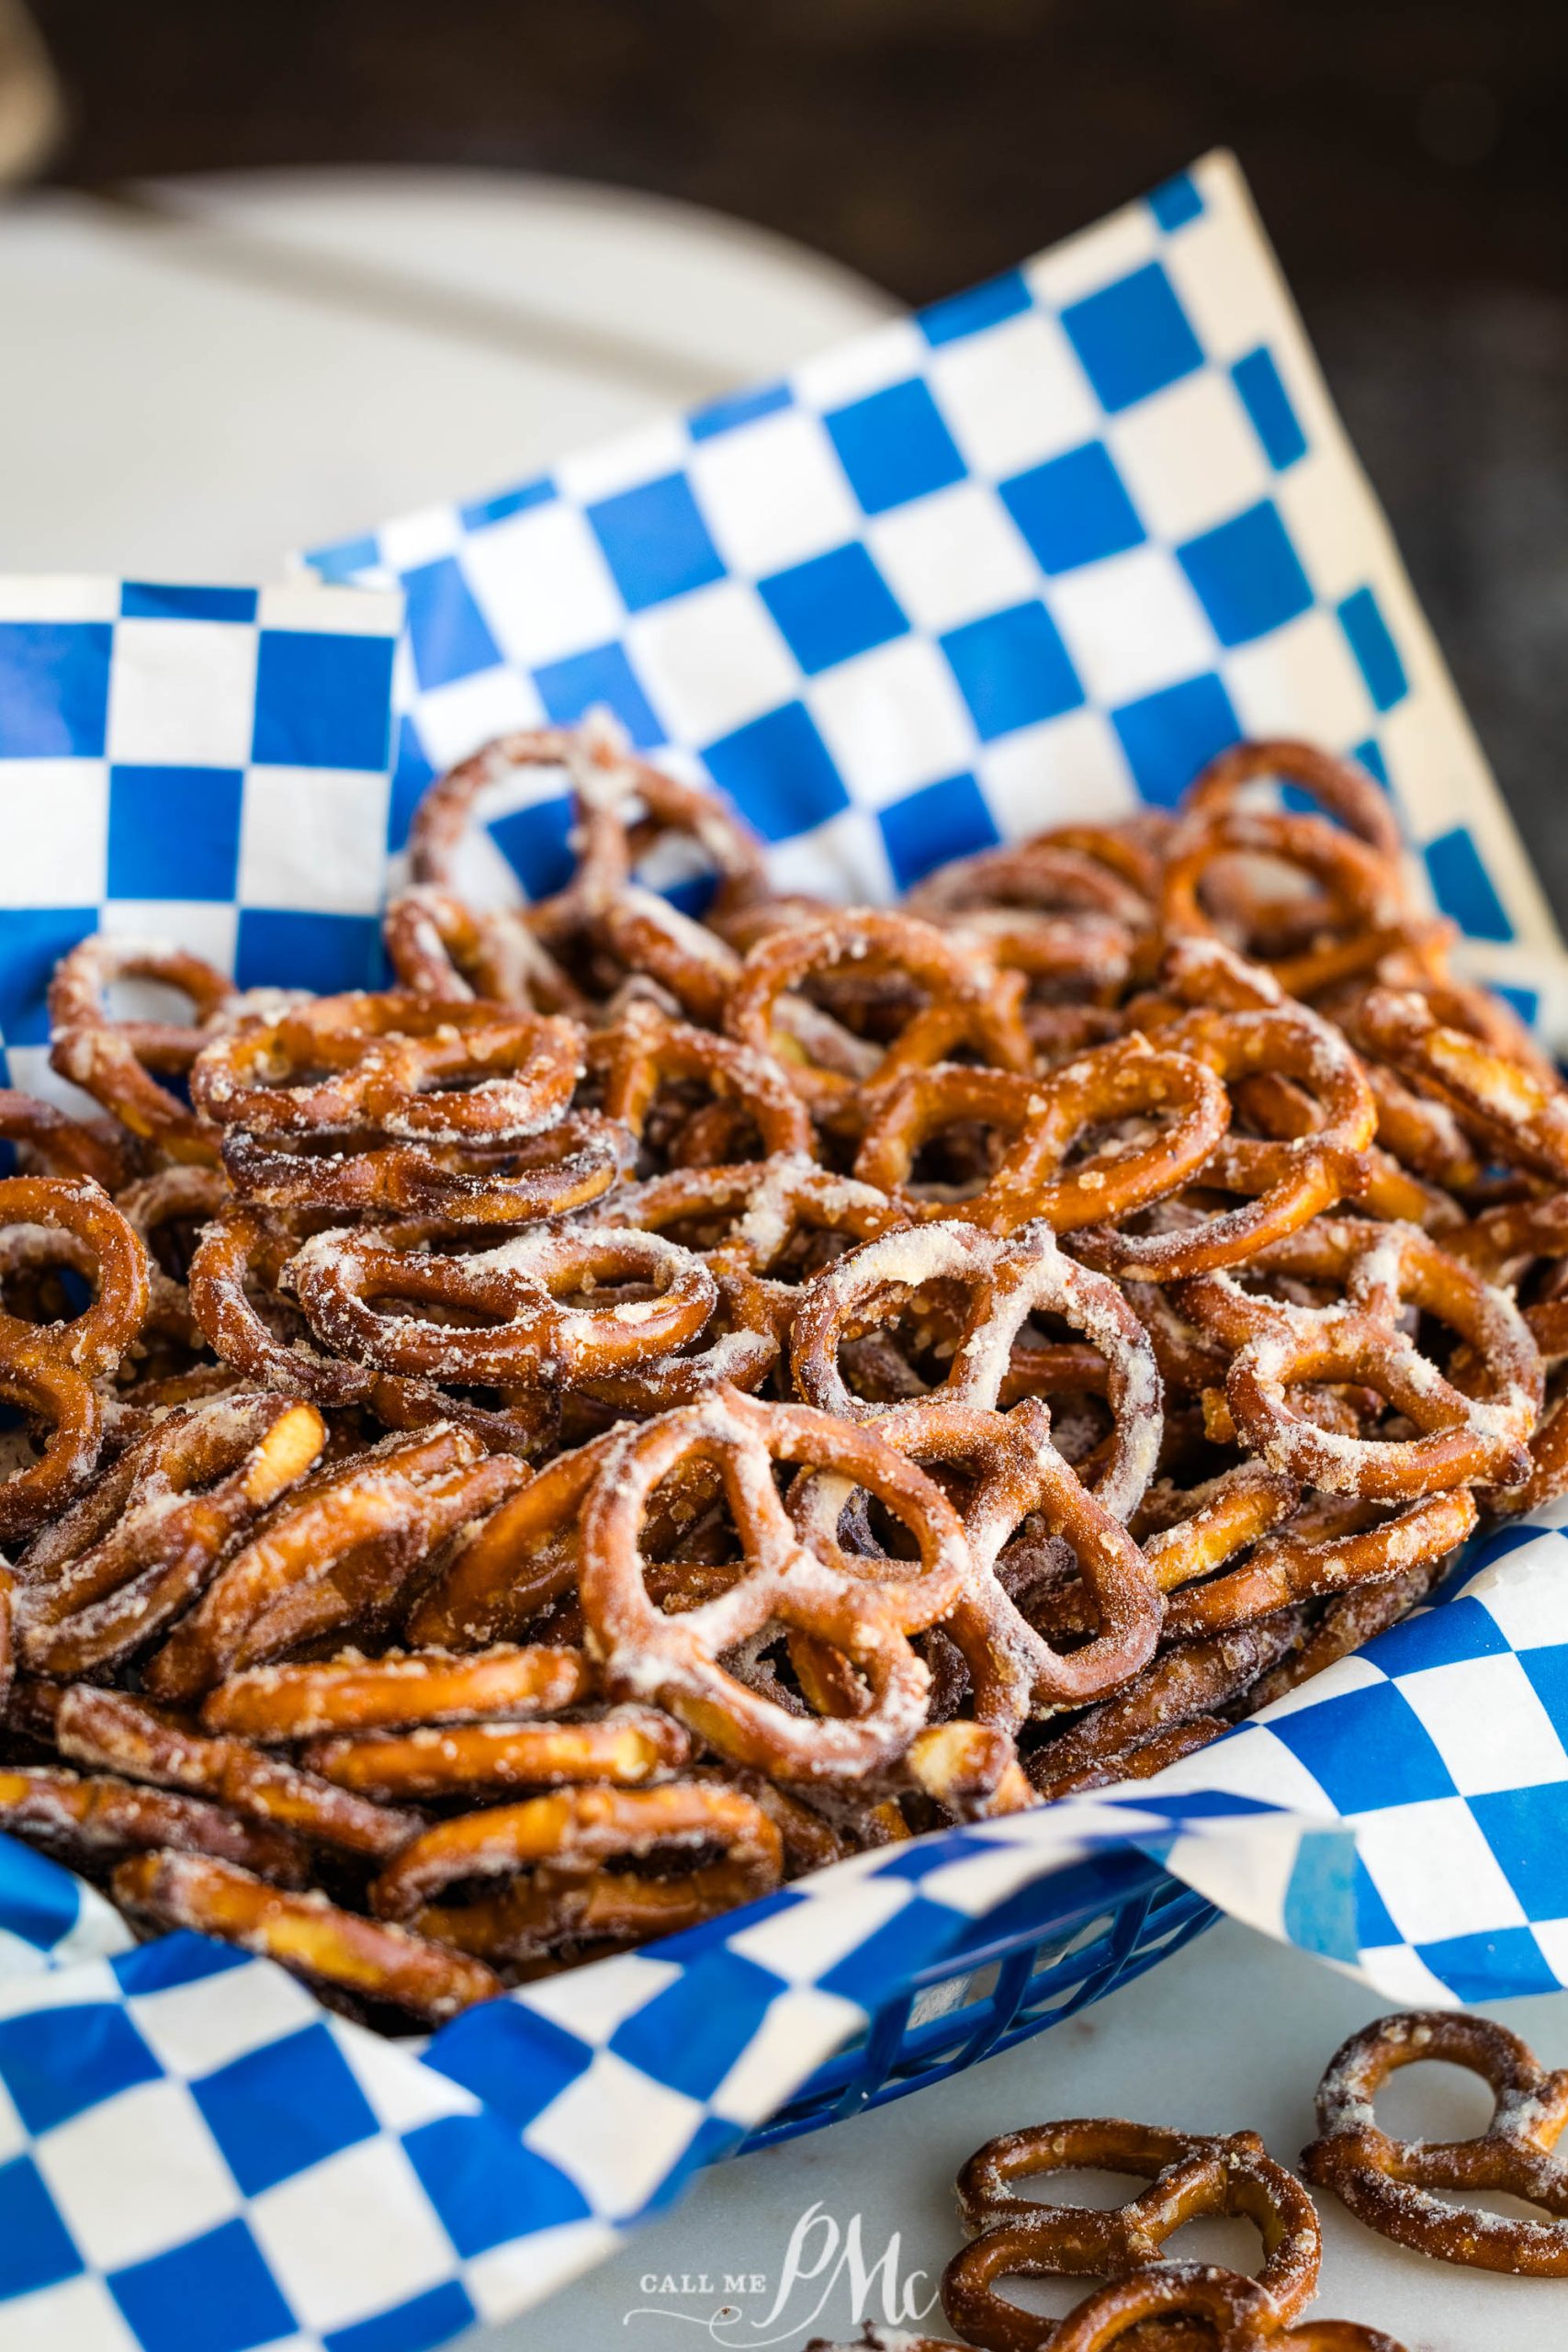 Pretzels in a blue and white checkered basket.